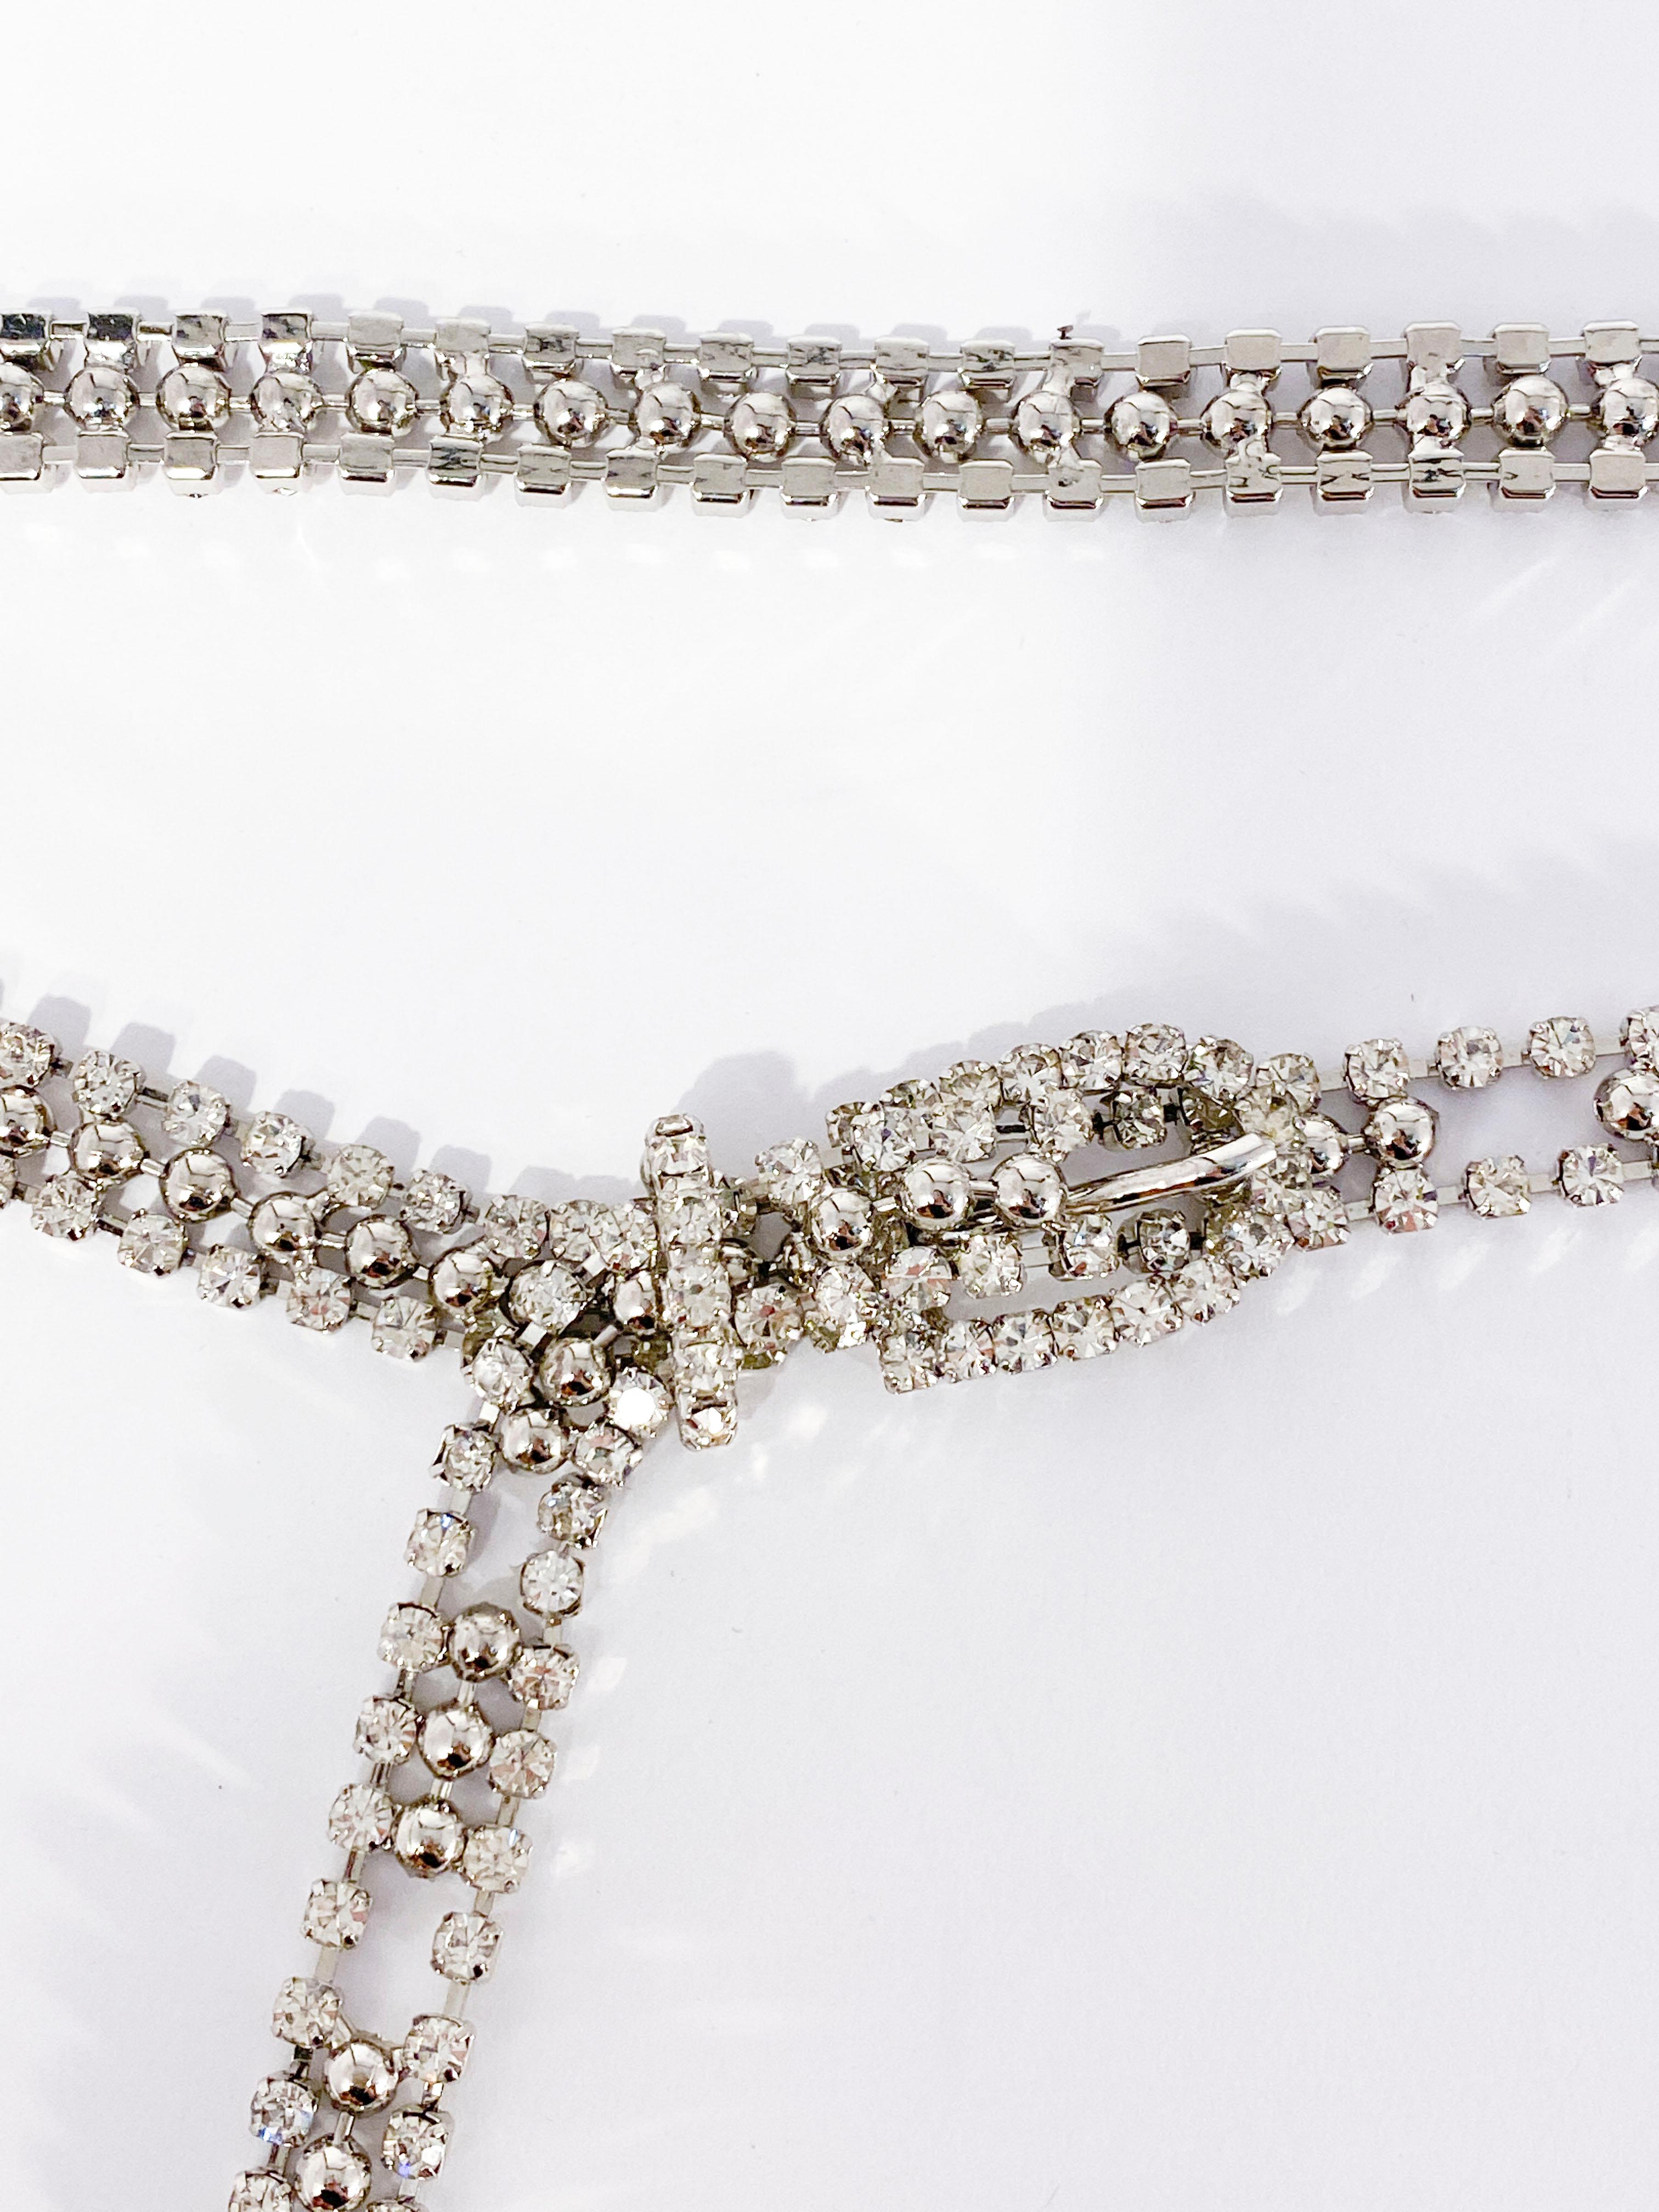 1930s clear rhinestone belt set in a silver-tone and accented with a studded center strand. The built in belt buckle is made of set rhinestones along with the tail and the keeper of the belt. The belt holes accommodate sizes from a 27 inch-waist to